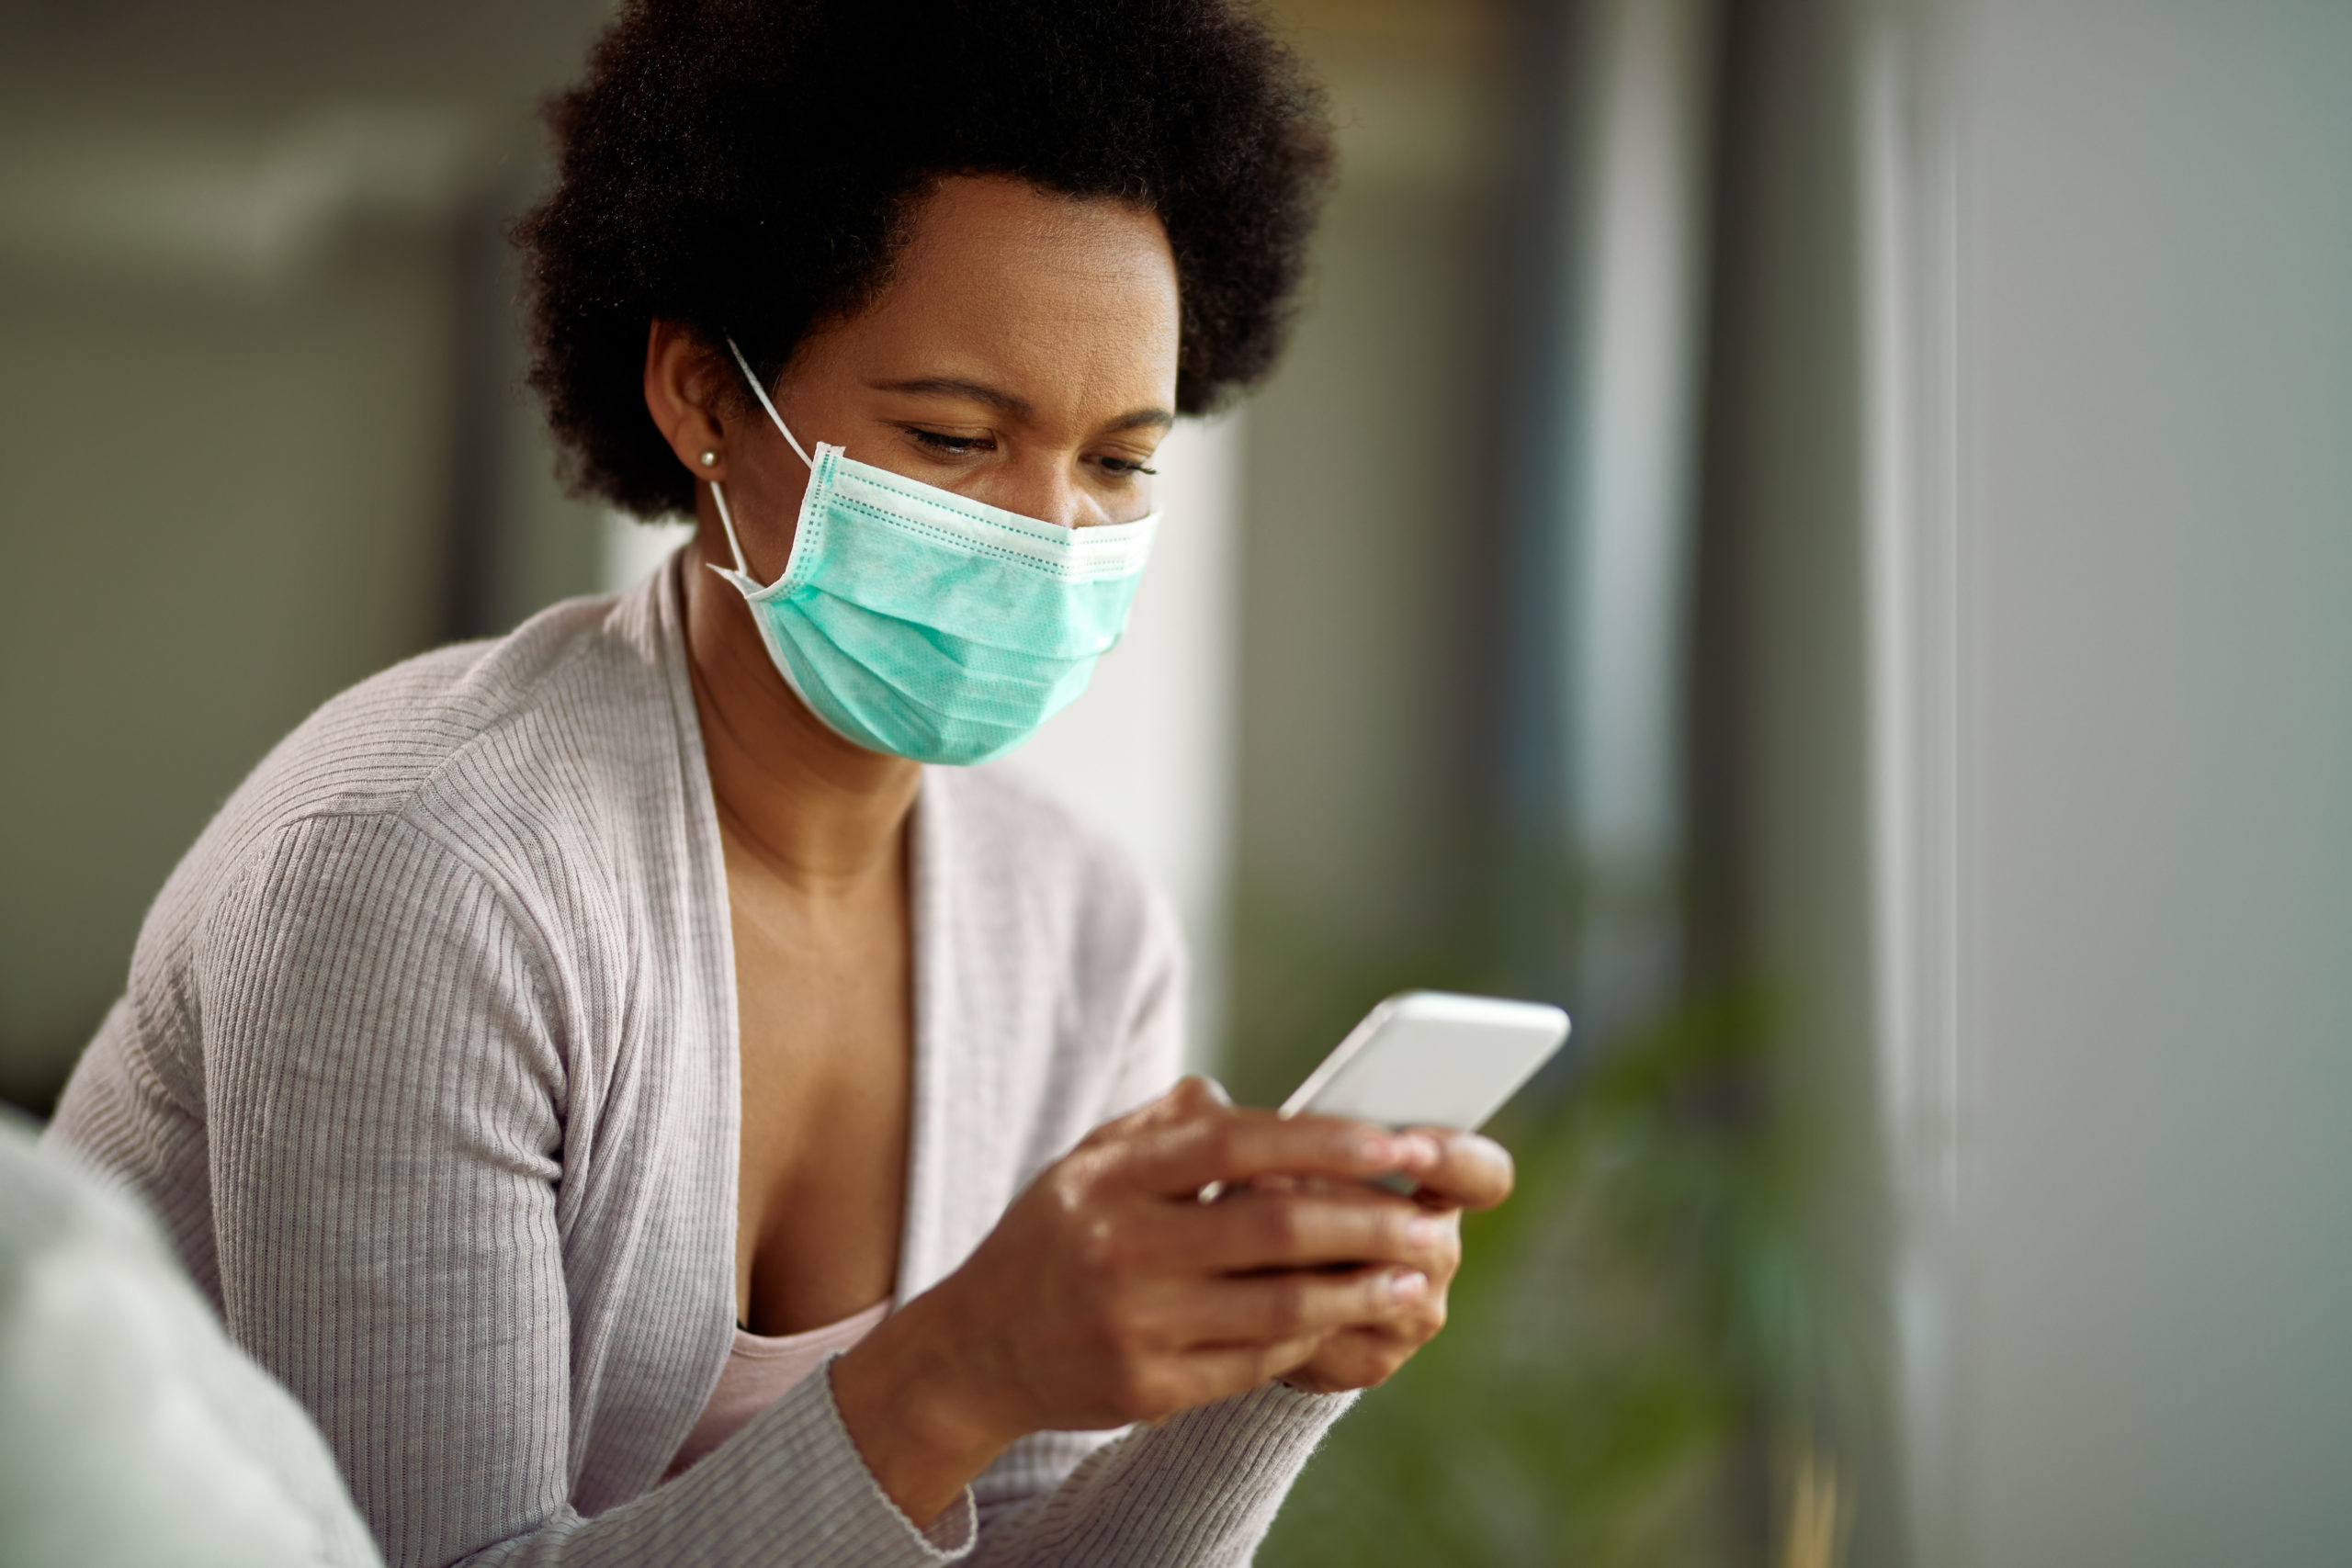 A women uses her smart phone to browse the internet while wearing a mask. This article outlines common online security risks that have gained popularity during the COVID-19 pandemic